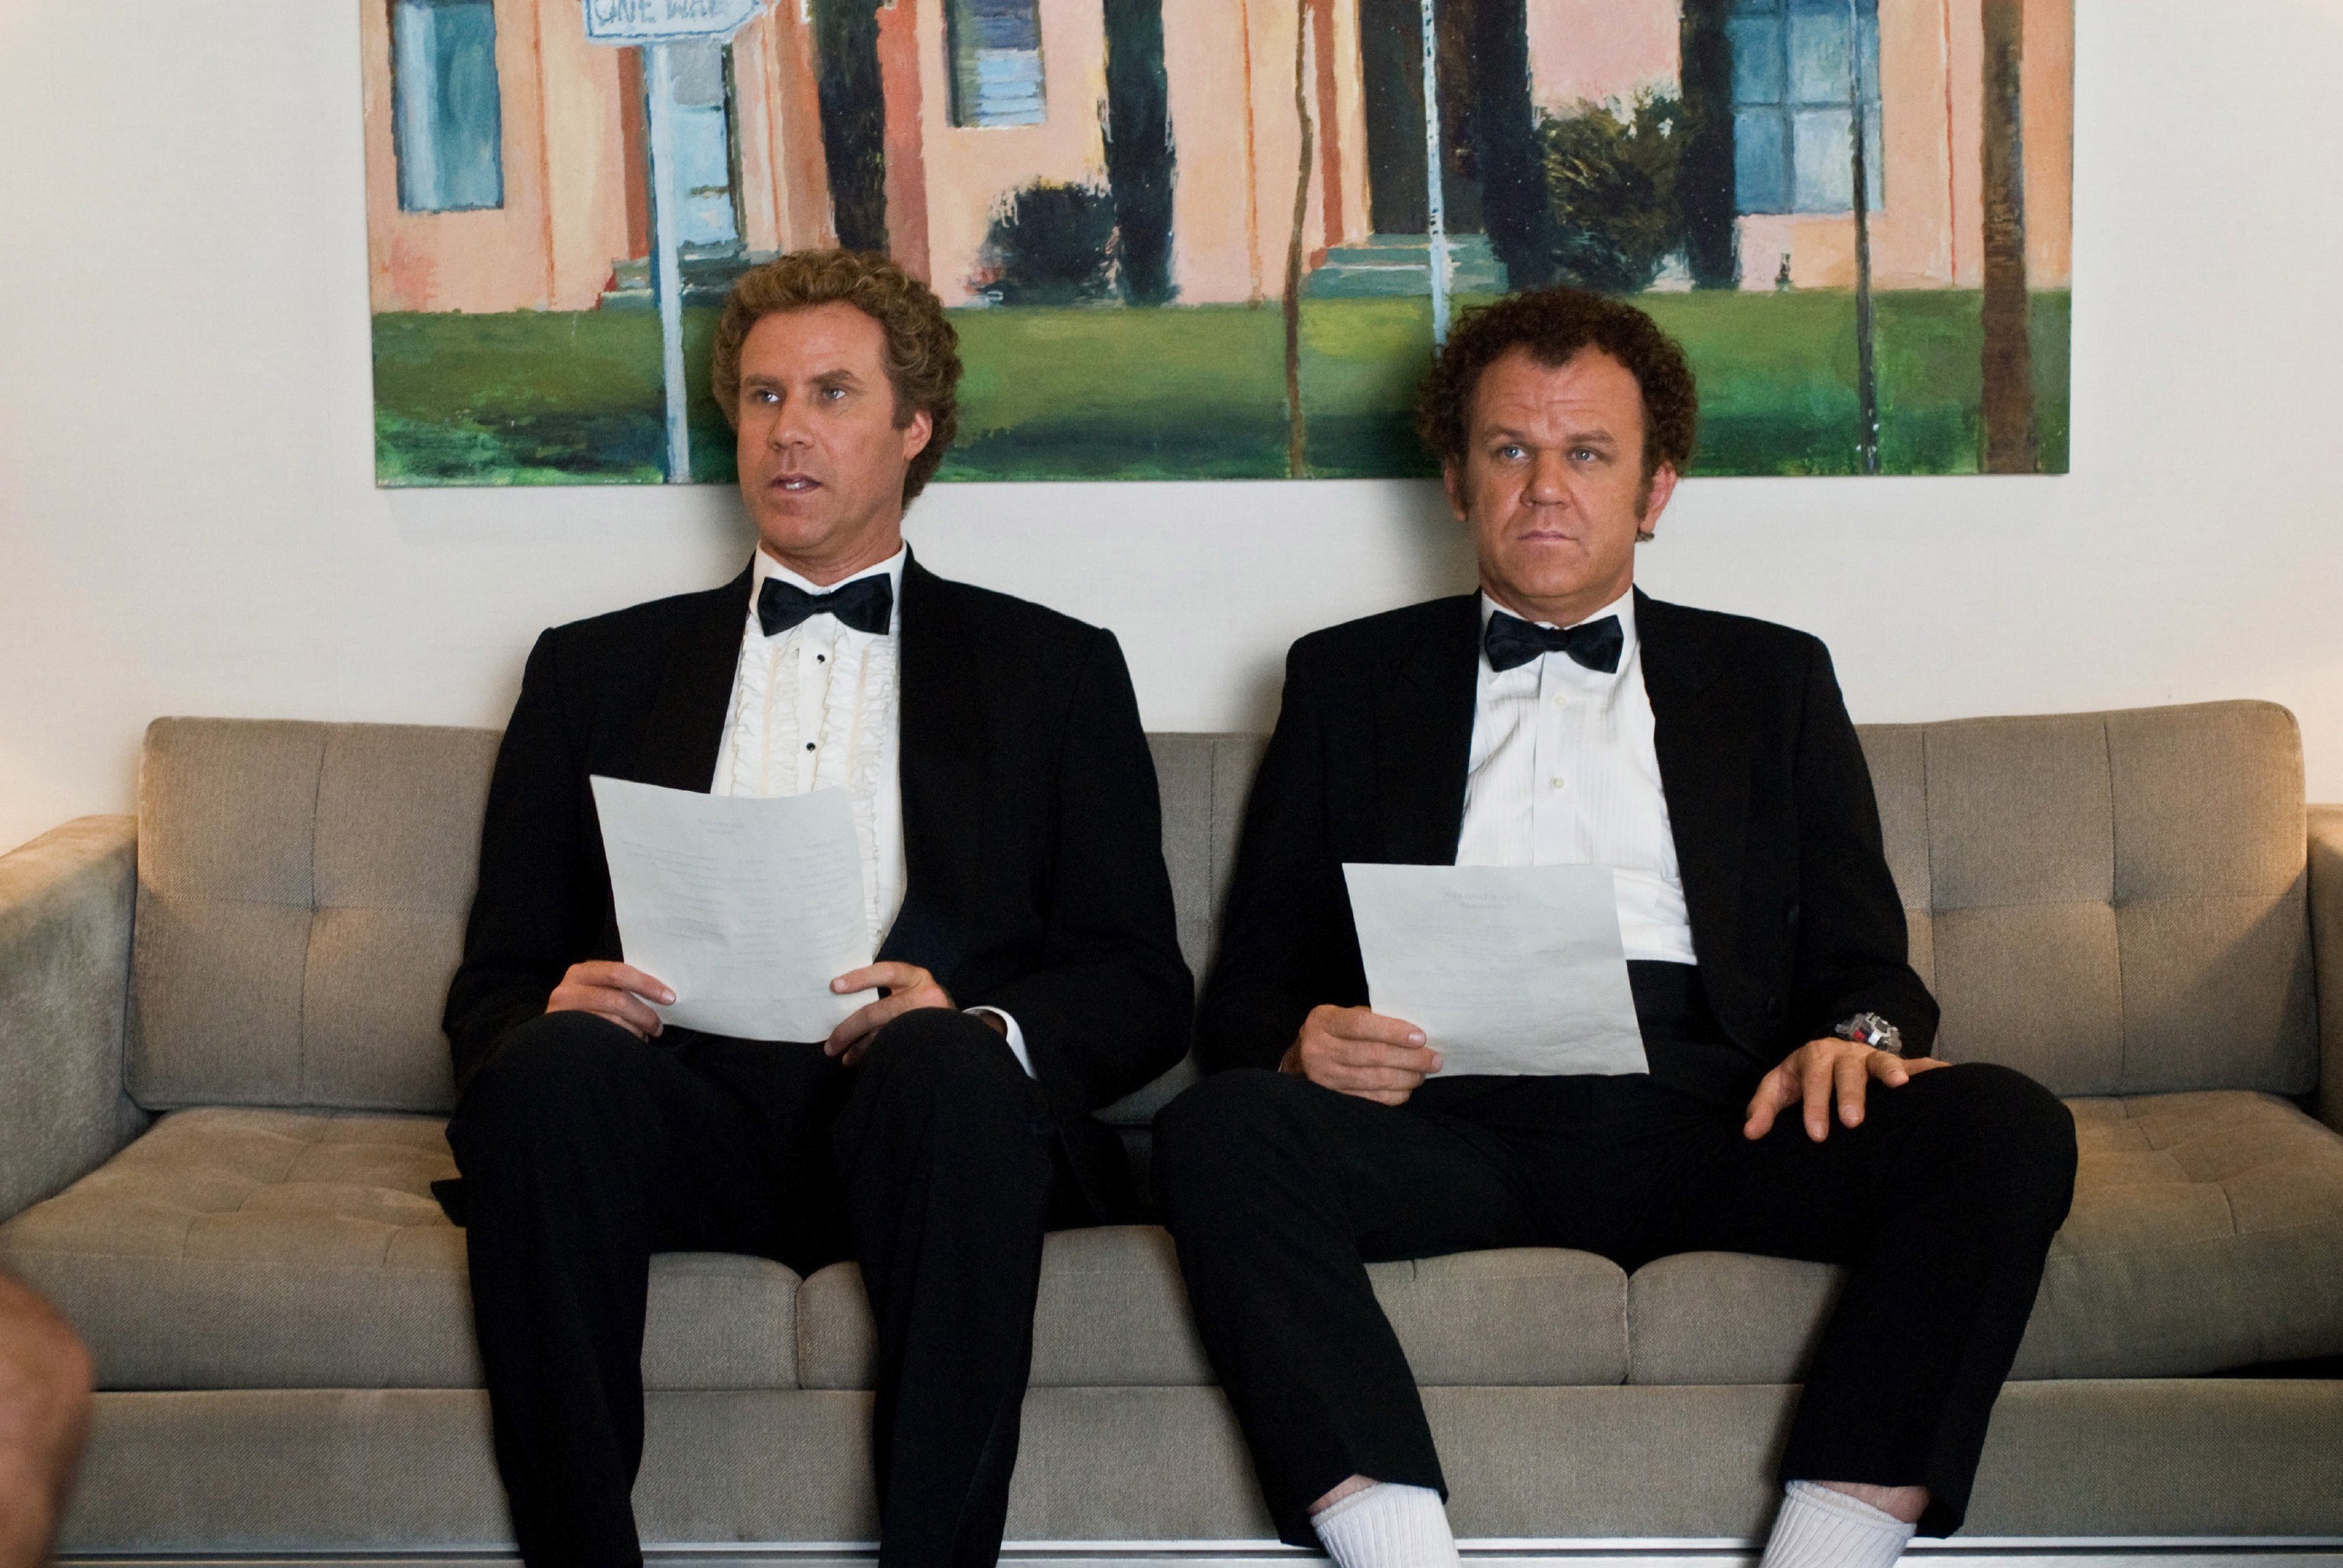 <p>"Step Brothers" showed just how hilarious blended families can be. The movie starred Will Ferrell and John C. Reilly as stepbrothers and man-children who won't grow up. Will and John were a hysterical duo that audiences truly enjoyed.</p>